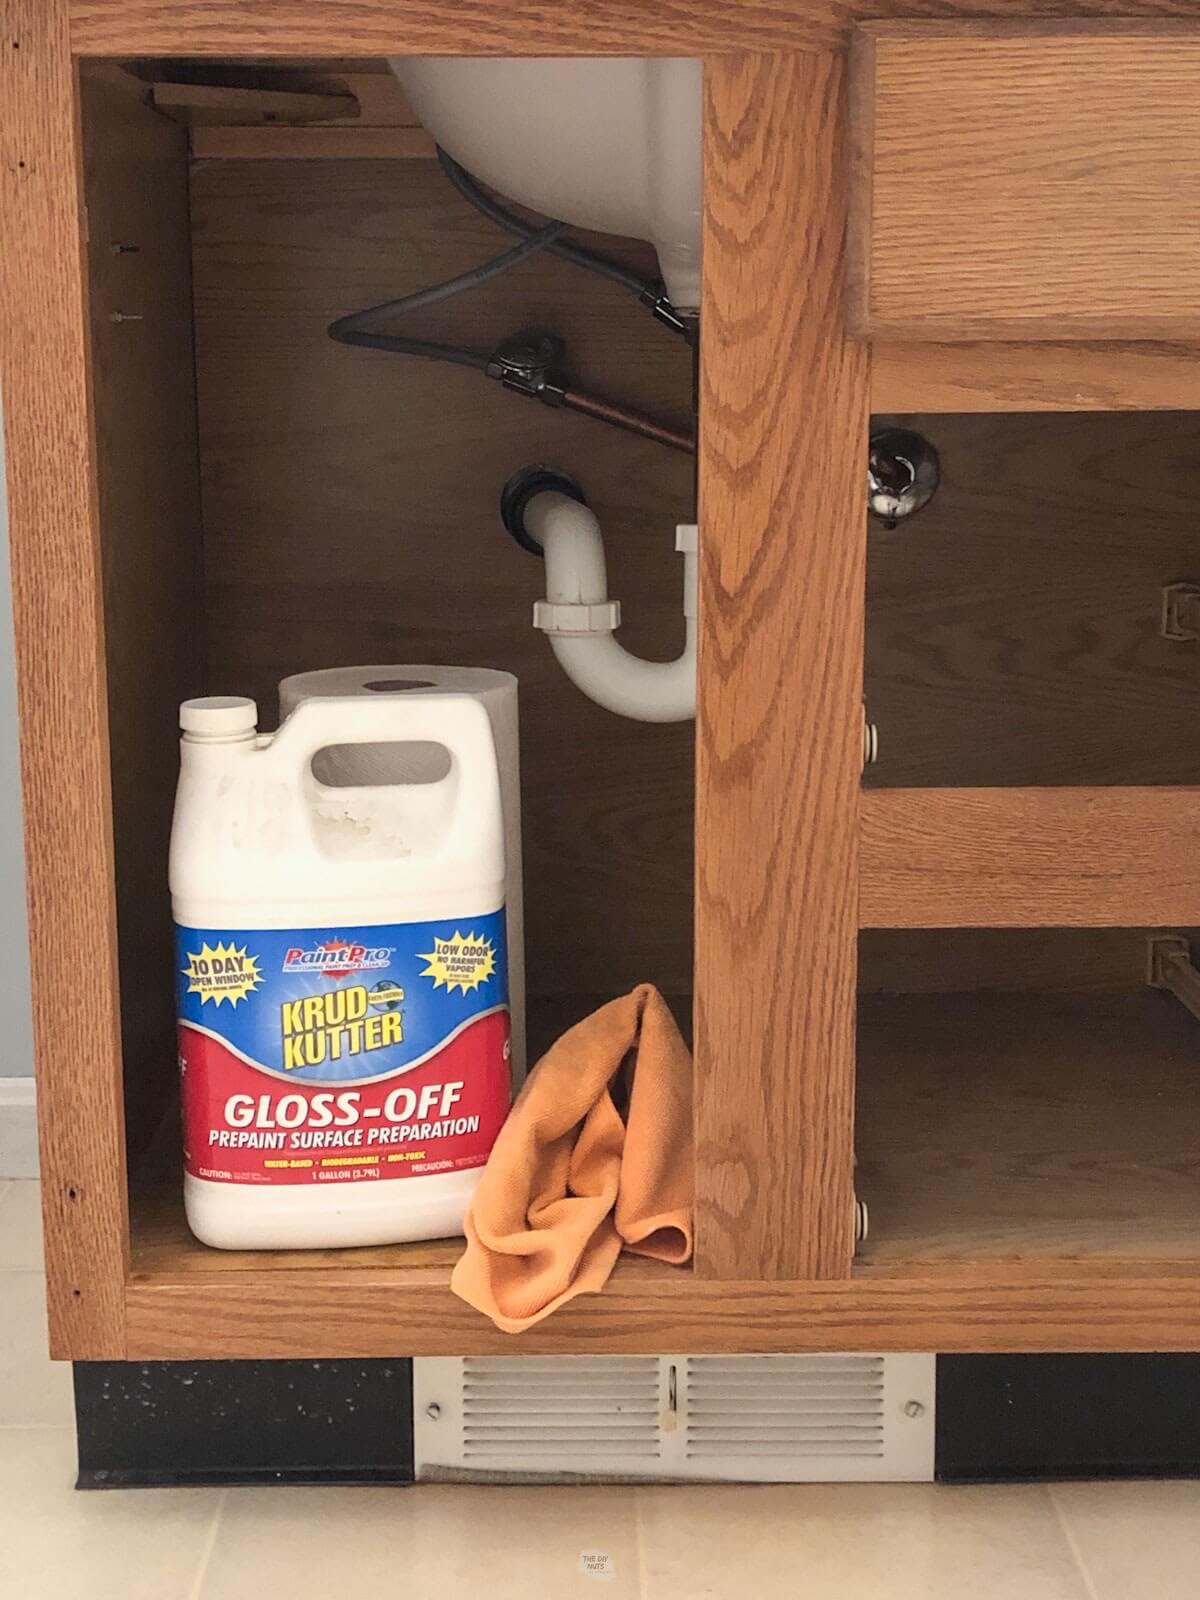 container of Krud Kutter surface prep siting in bathroom oak cabinet box.